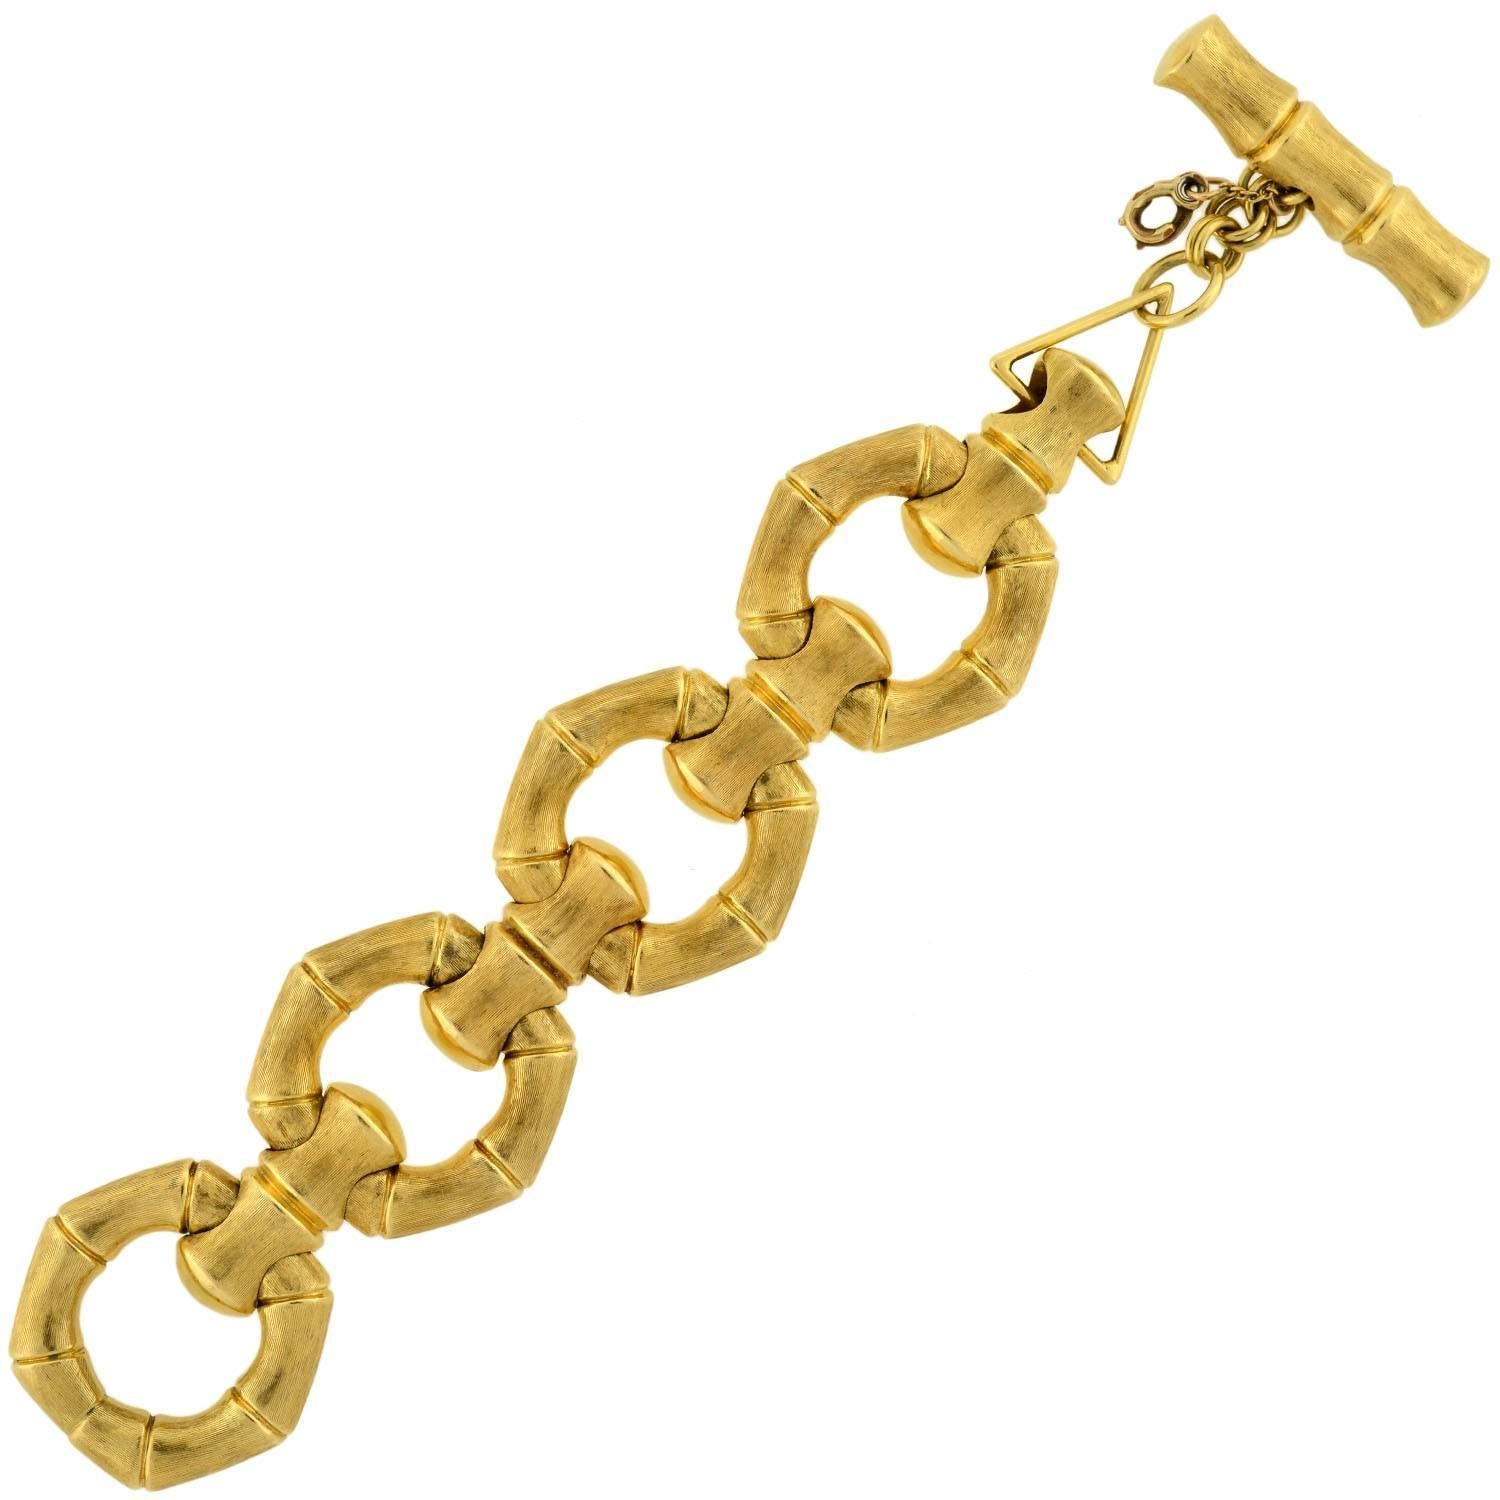 This vintage 18kt gold bracelet from the 1960s makes a very big statement! The stylish Italian-made piece is made of oversized "bamboo" links and has a very substantial look and feel. Each open link has a smooth surface on one side and a